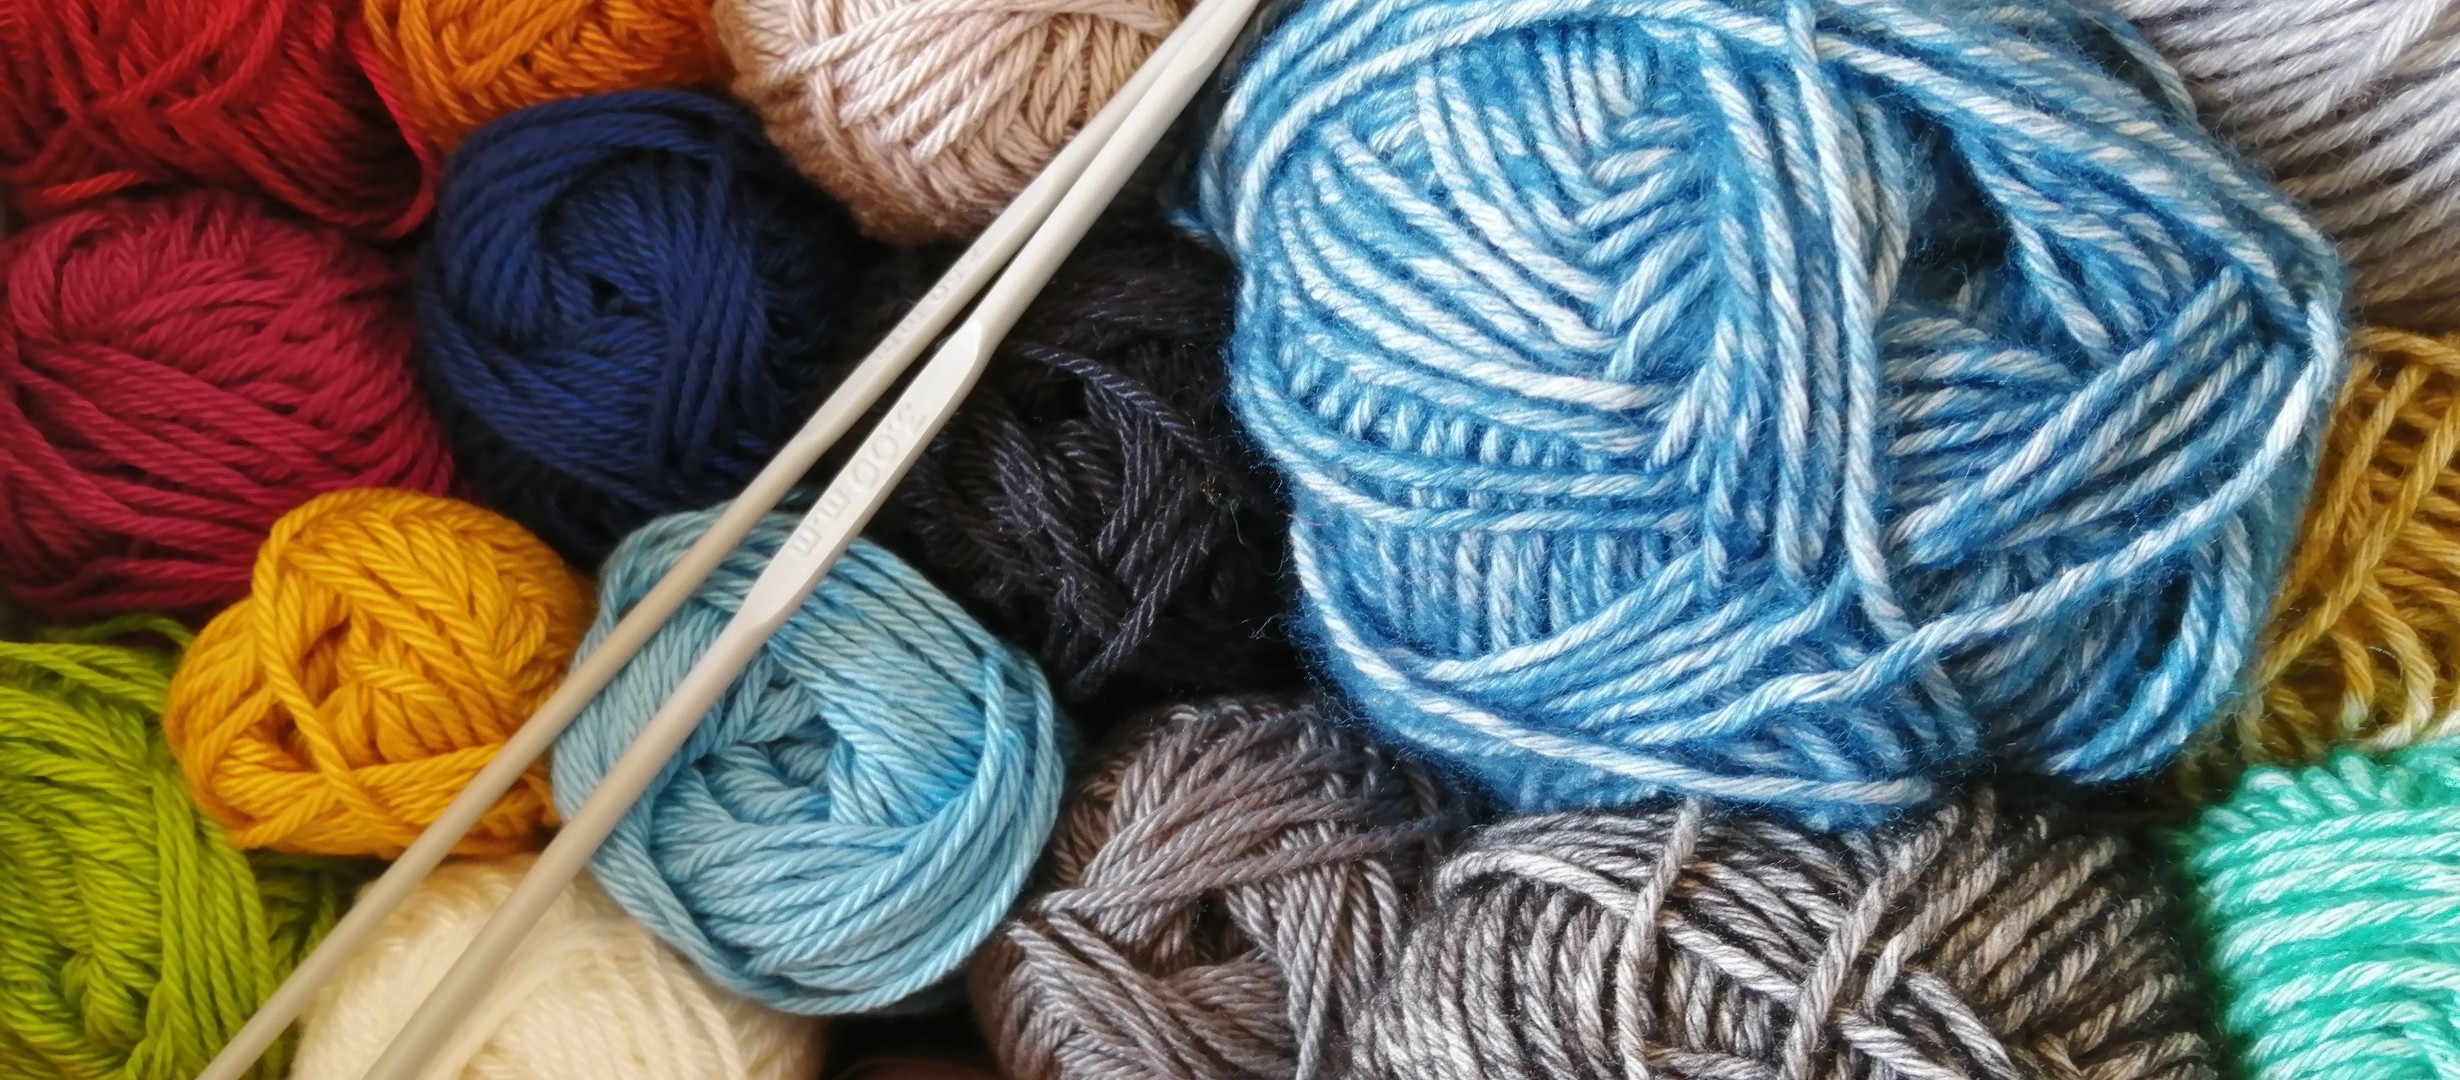 A pile of colourful wool with knotting needles